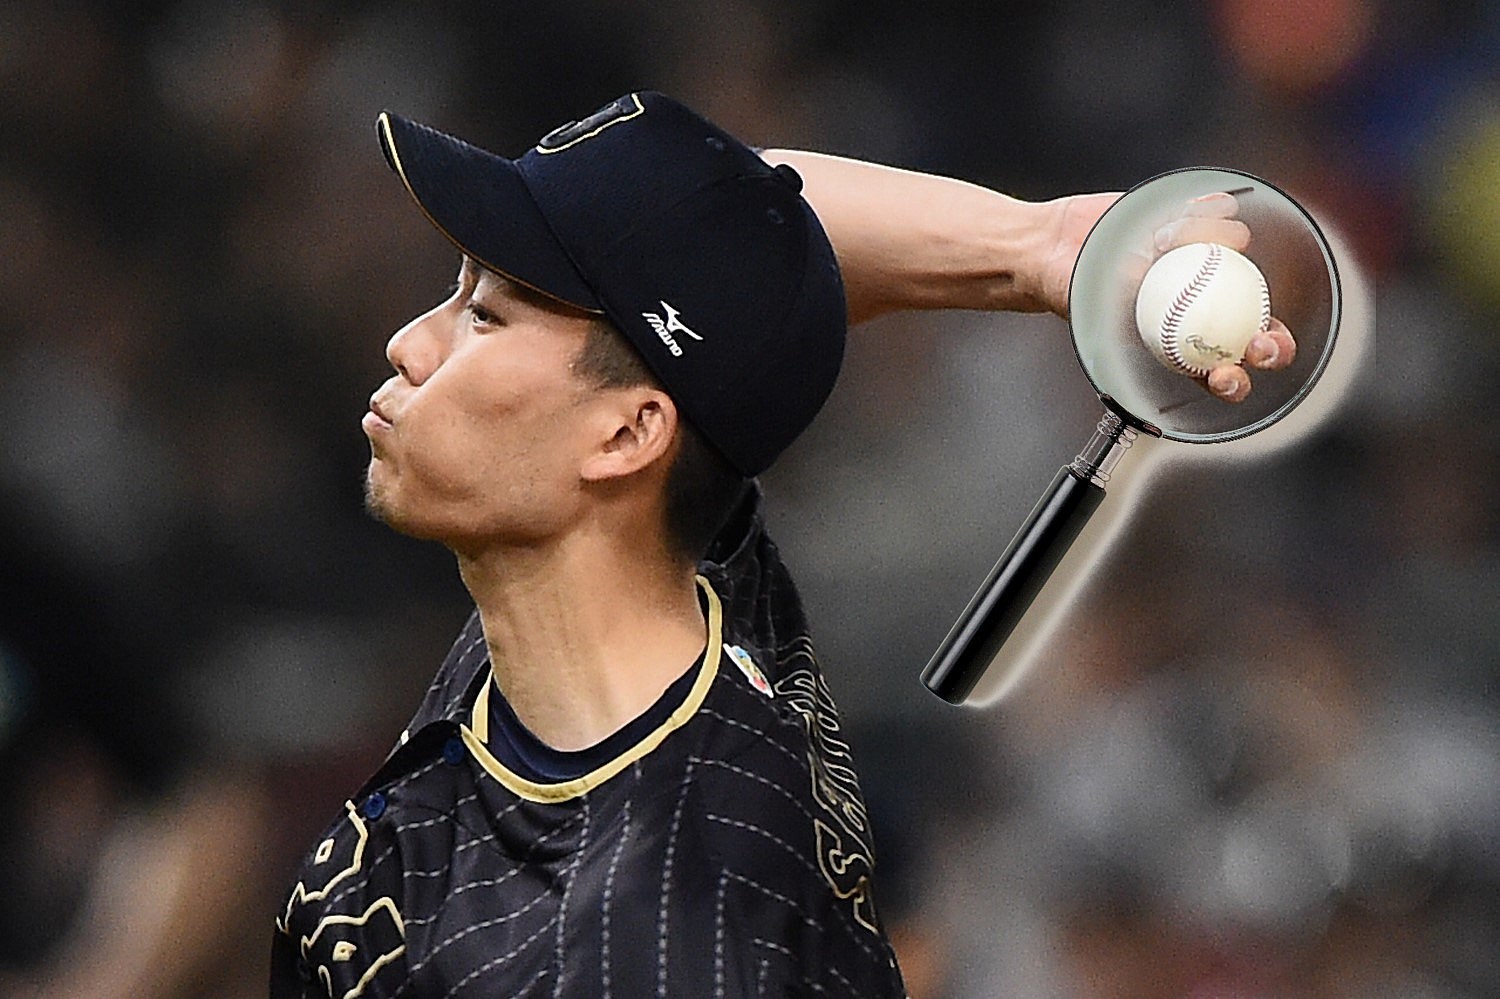 Kodai Senga and the ghost forkball: What can we expect?